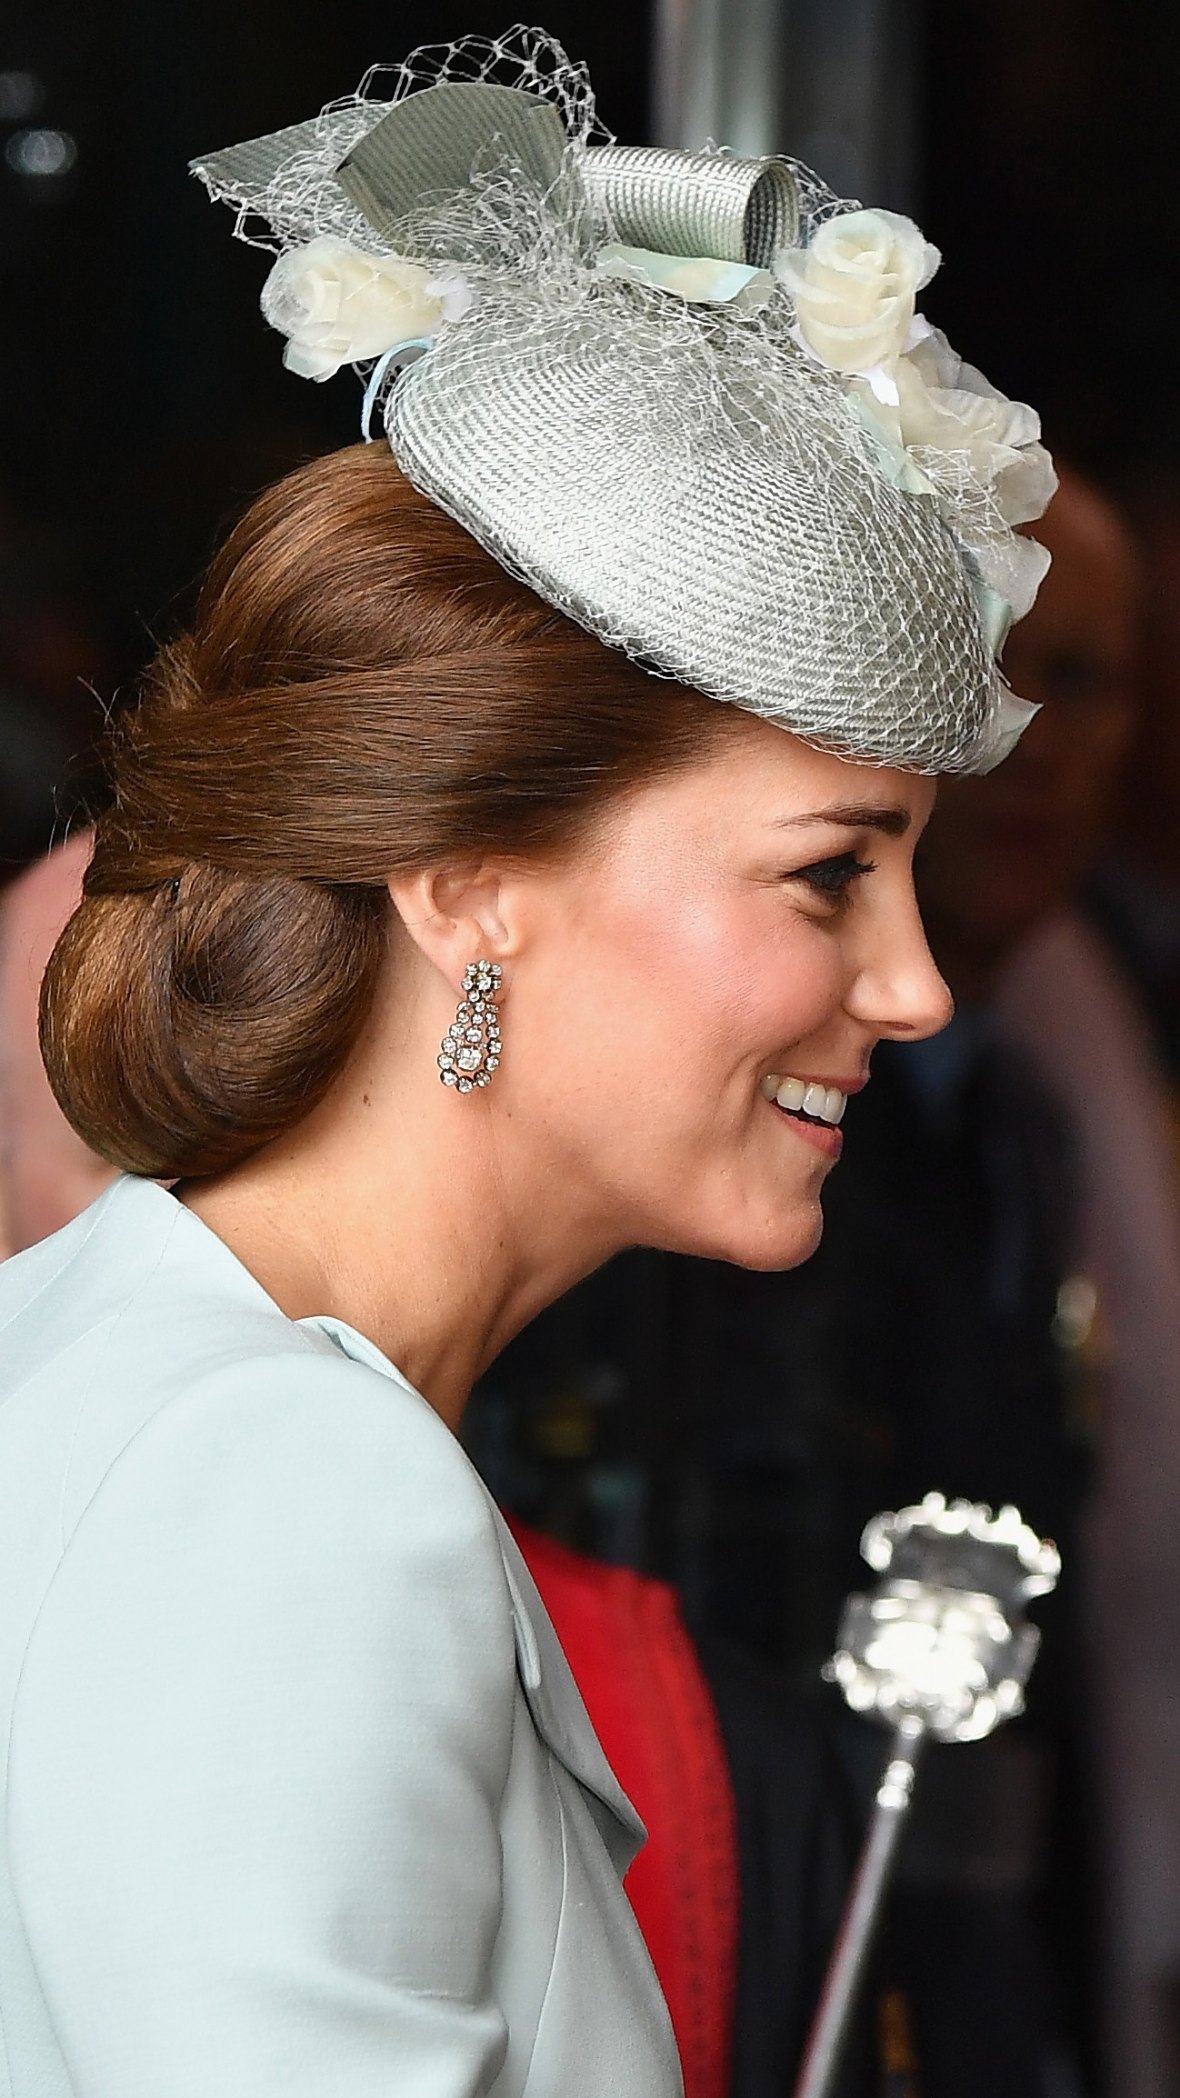 Kate Middleton Wears Same Updo Two Days in a Row Thanks to a Subtle Hairnet